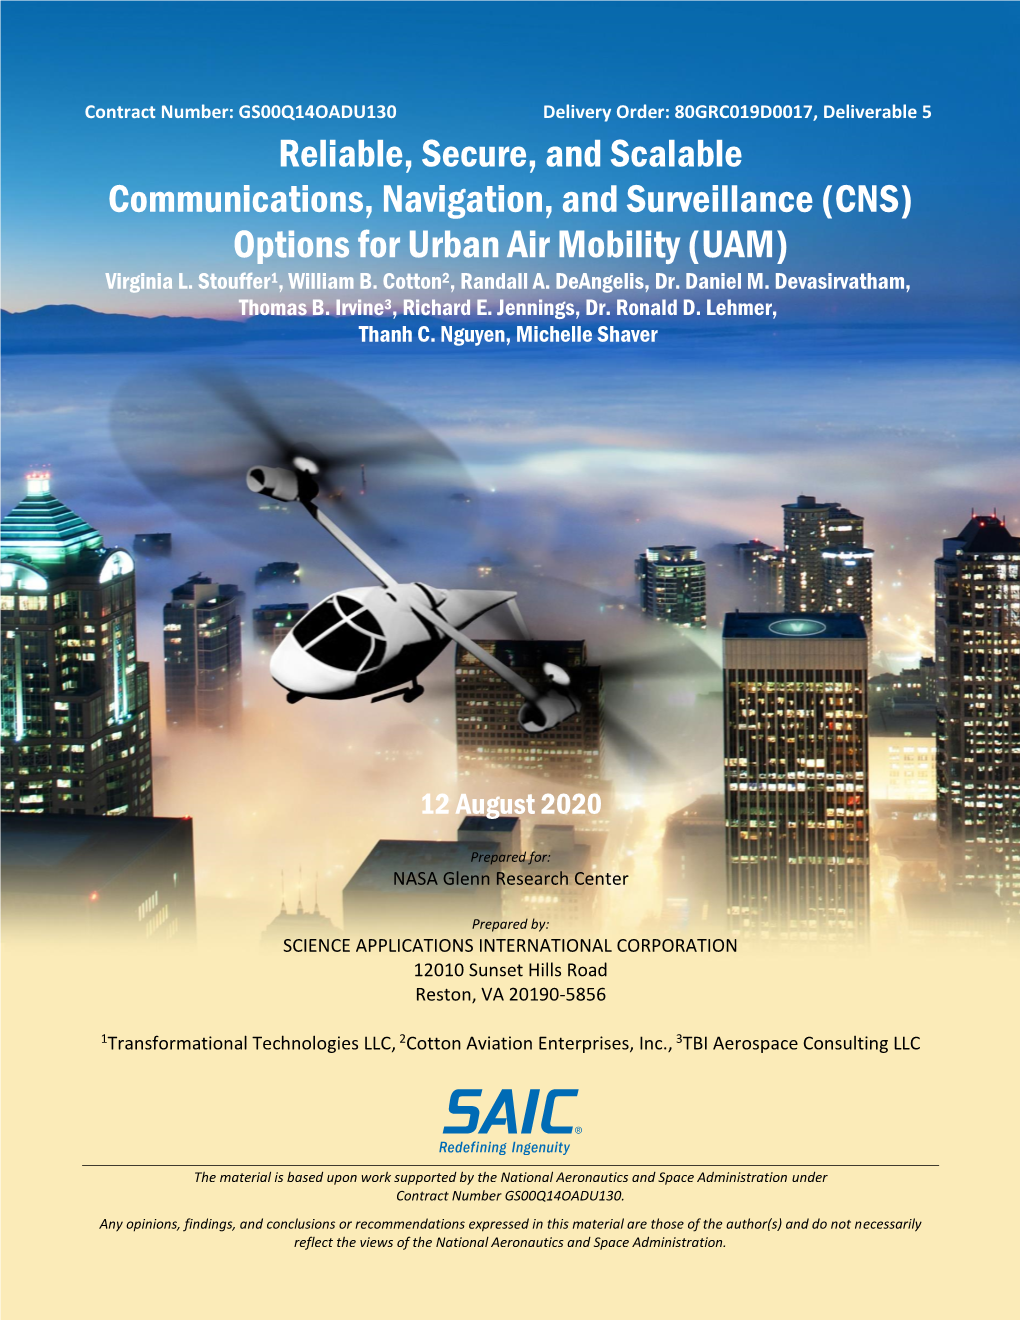 Reliable, Secure, and Scalable Communications, Navigation, and Surveillance (CNS) Options for Urban Air Mobility (UAM) Virginia L